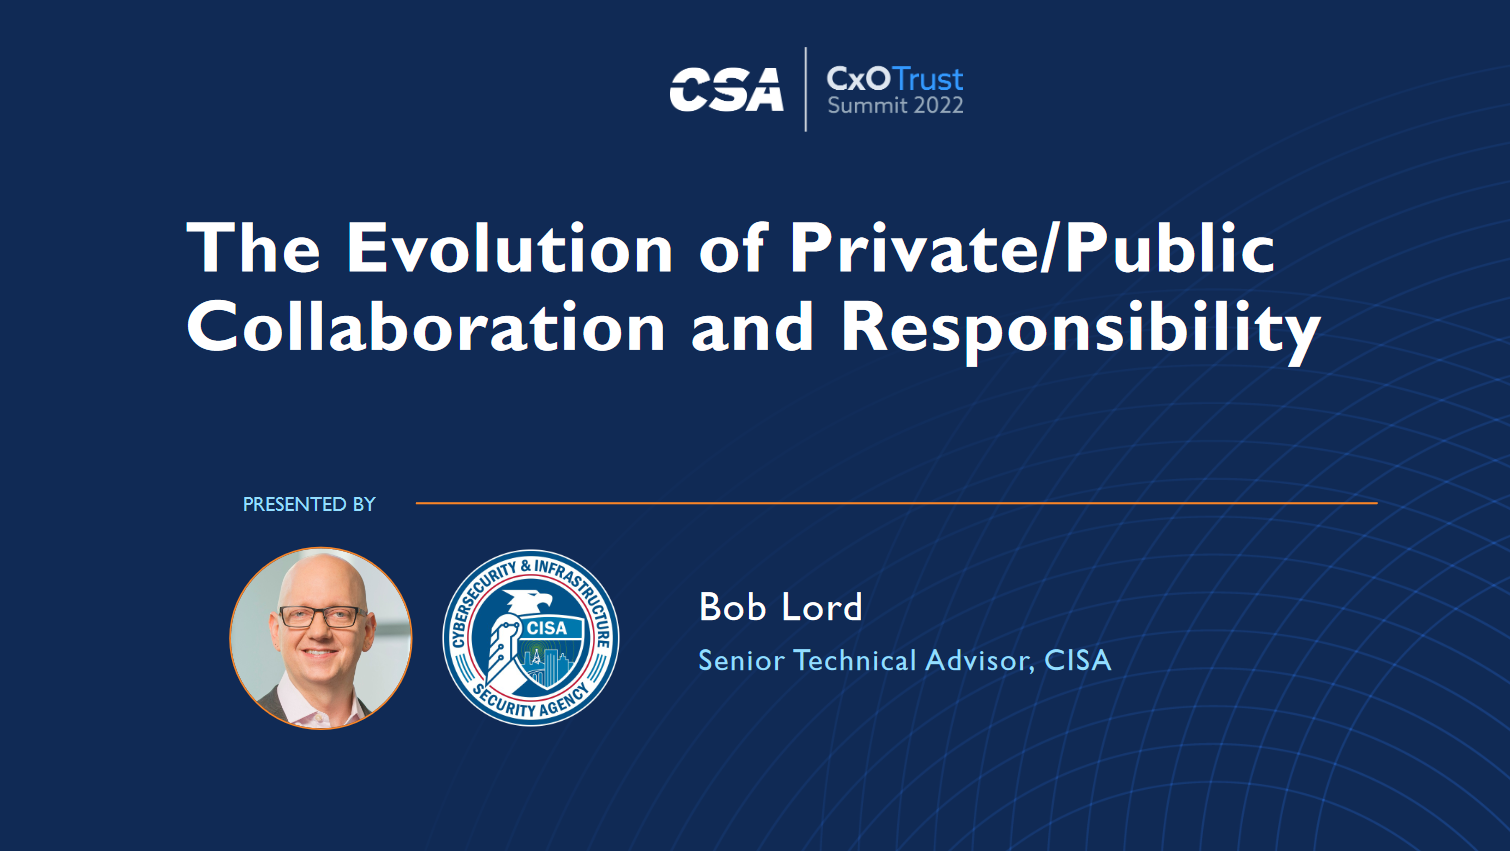 The Evolution of Private/Public Collaboration and Responsibility